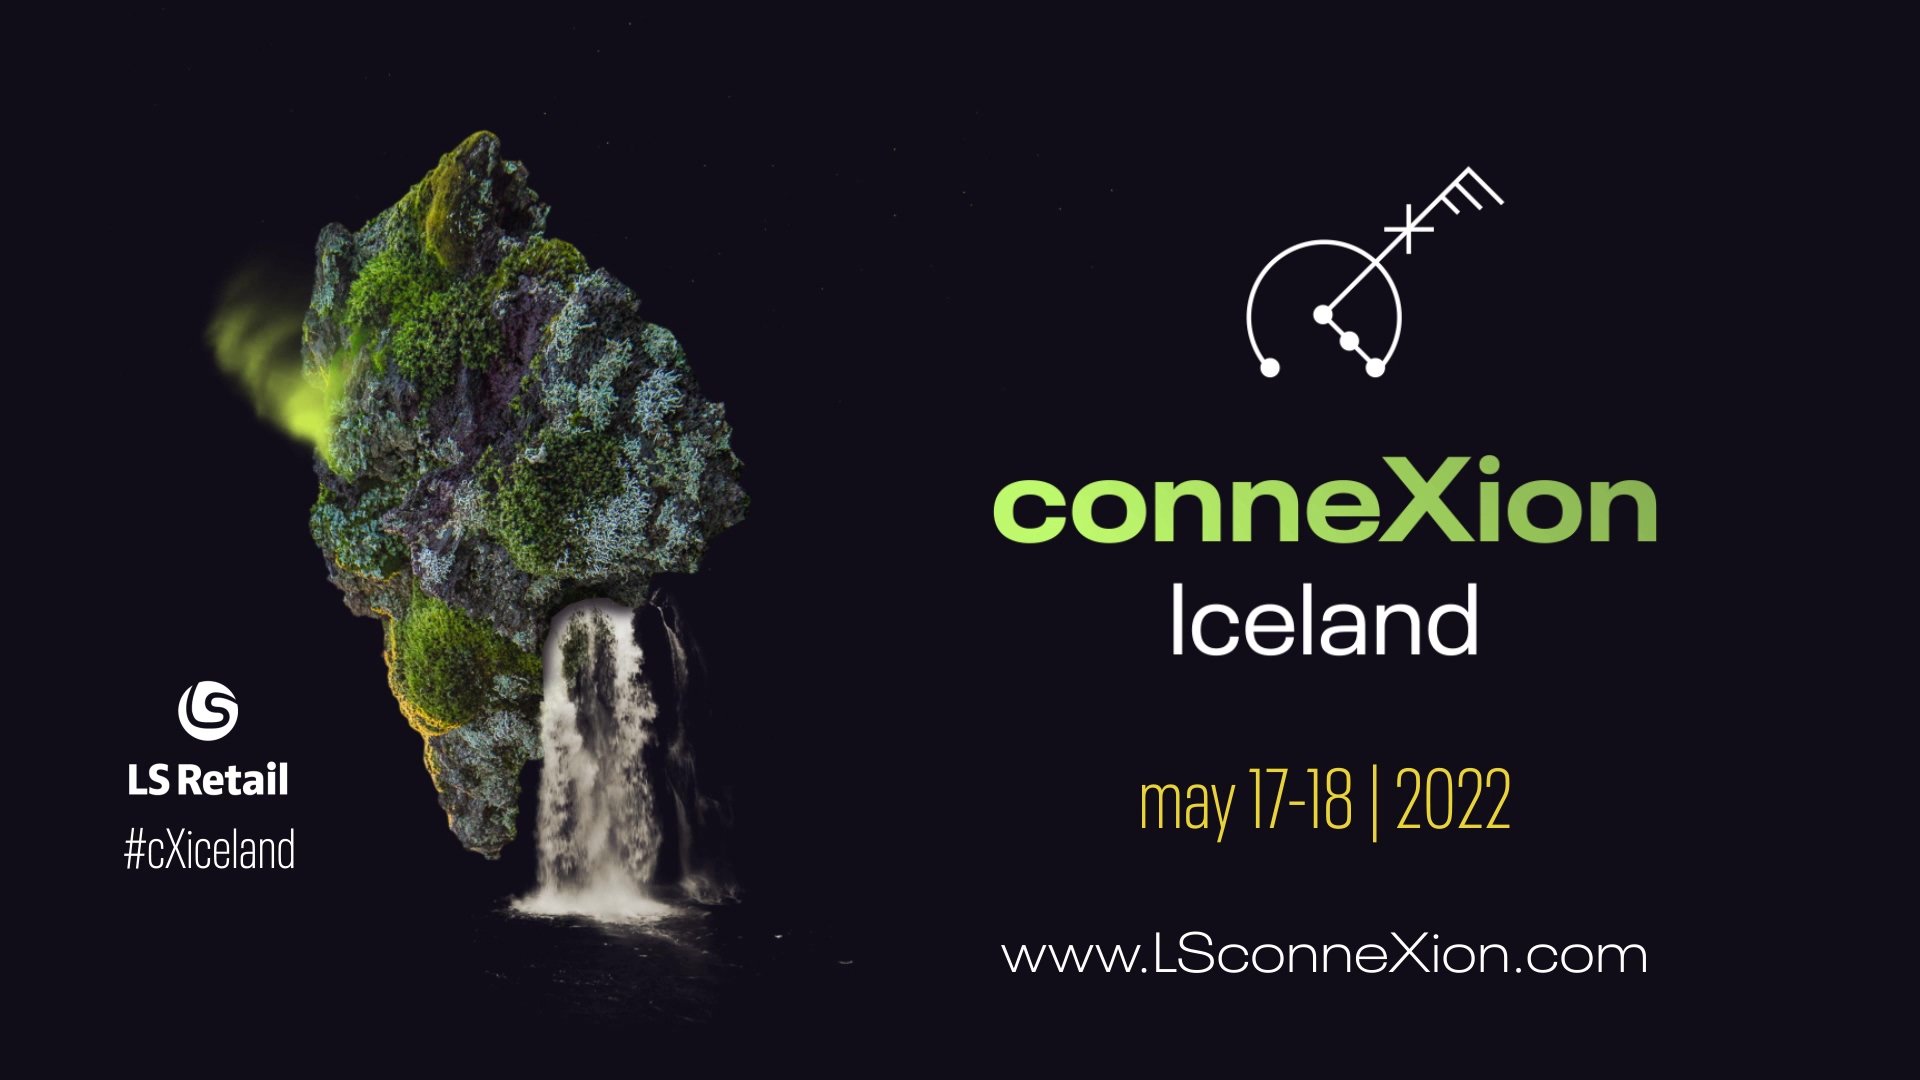 conneXion Iceland | 17-18 May 2022